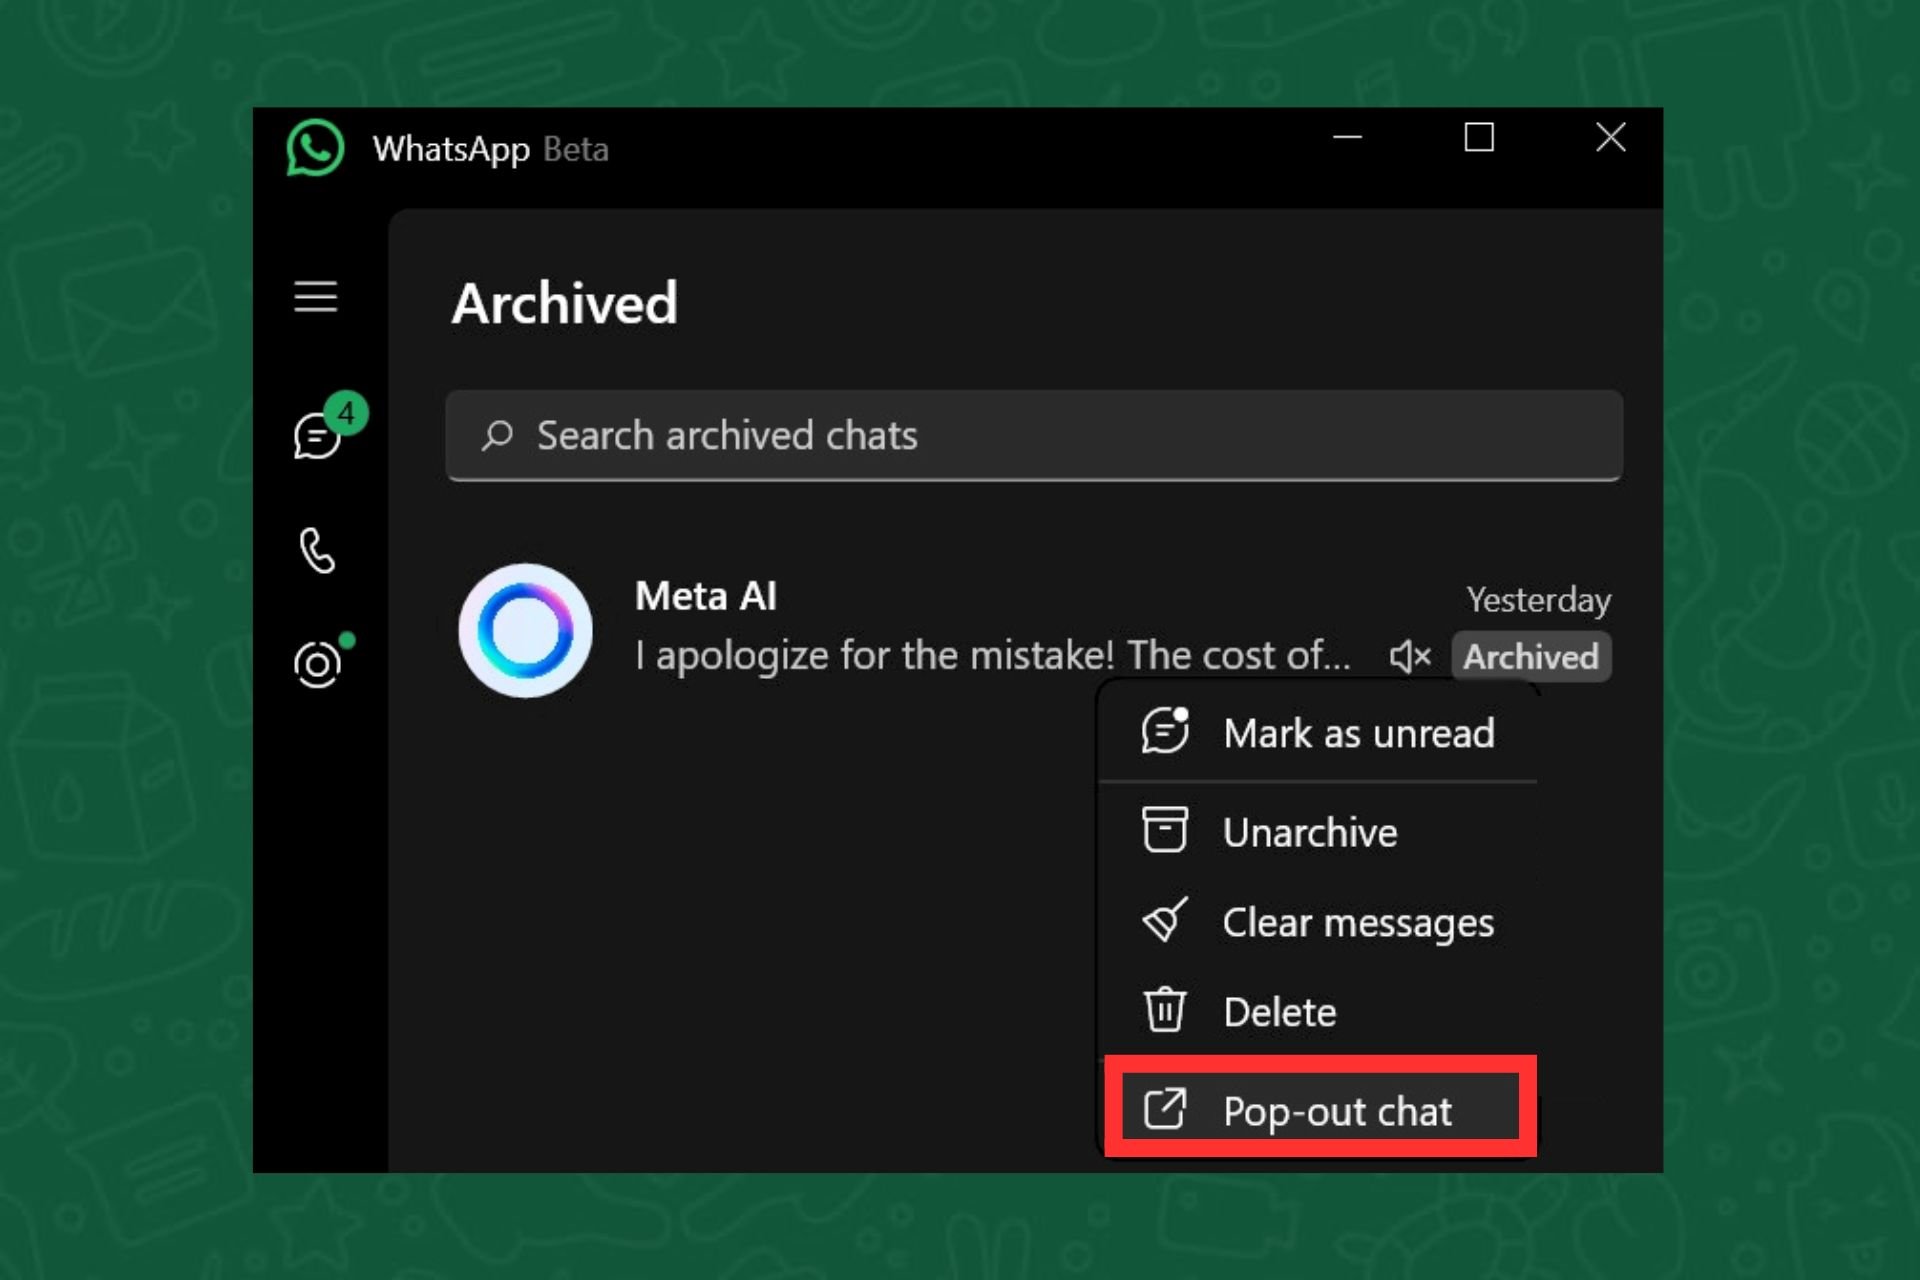 The latest update for WhatsApp adds new multi-window support & more on Windows 10 & 11